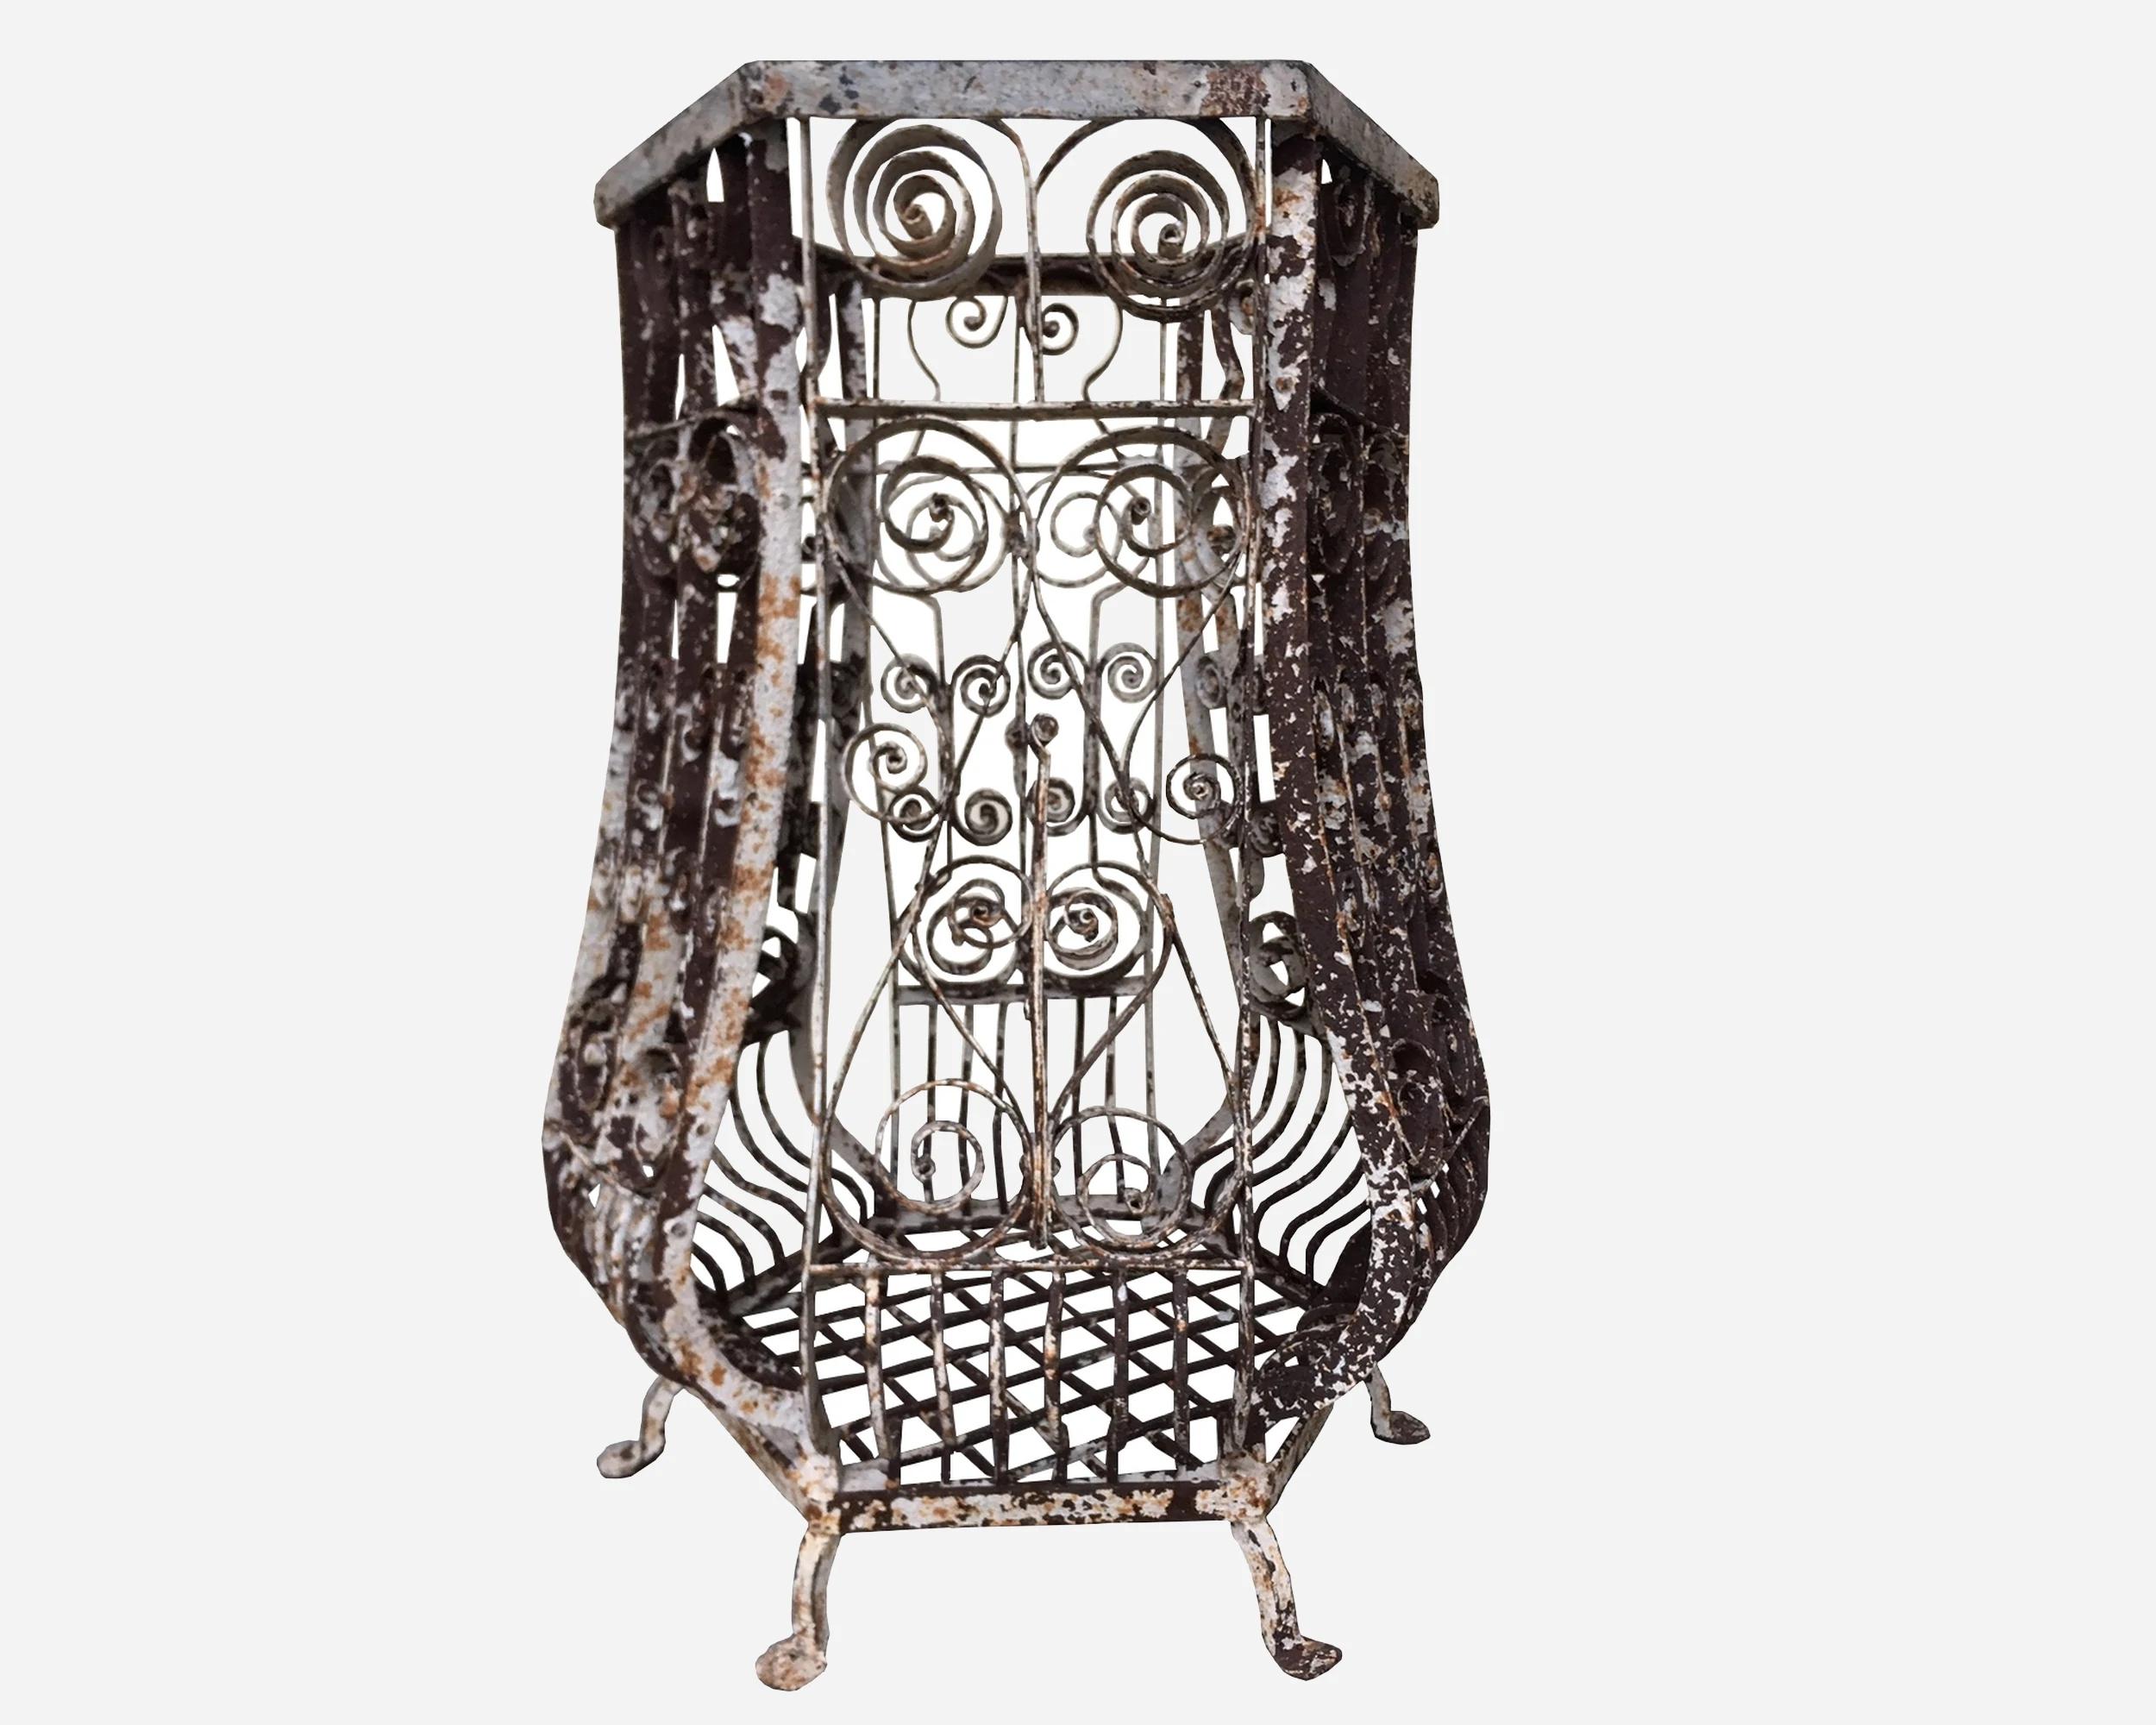 Large wrought-iron jardinière or sellette, circa 1880/1900, from the casino garden at La Bourboule, spa town with belle époque charm in central France, on the banks of the Dordogne.
Originally, it would have been fitted with a planter or supported a